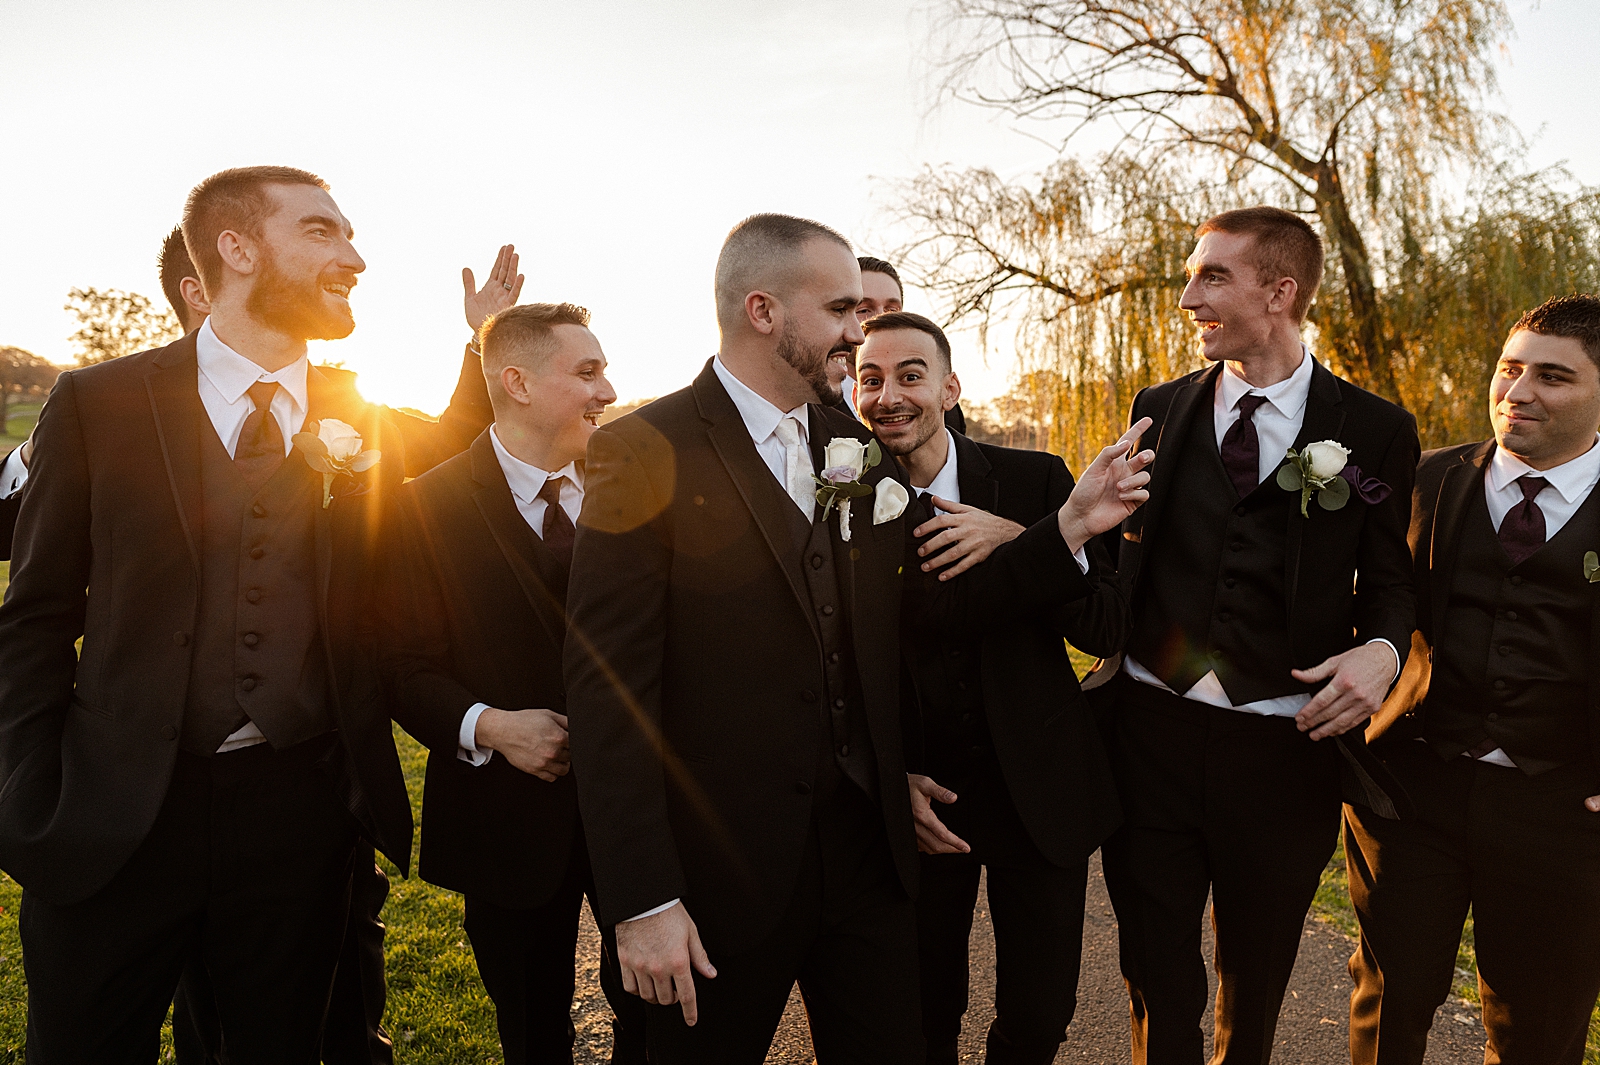 Candid portrait of Groom with Groomsmen outside as the sun sets